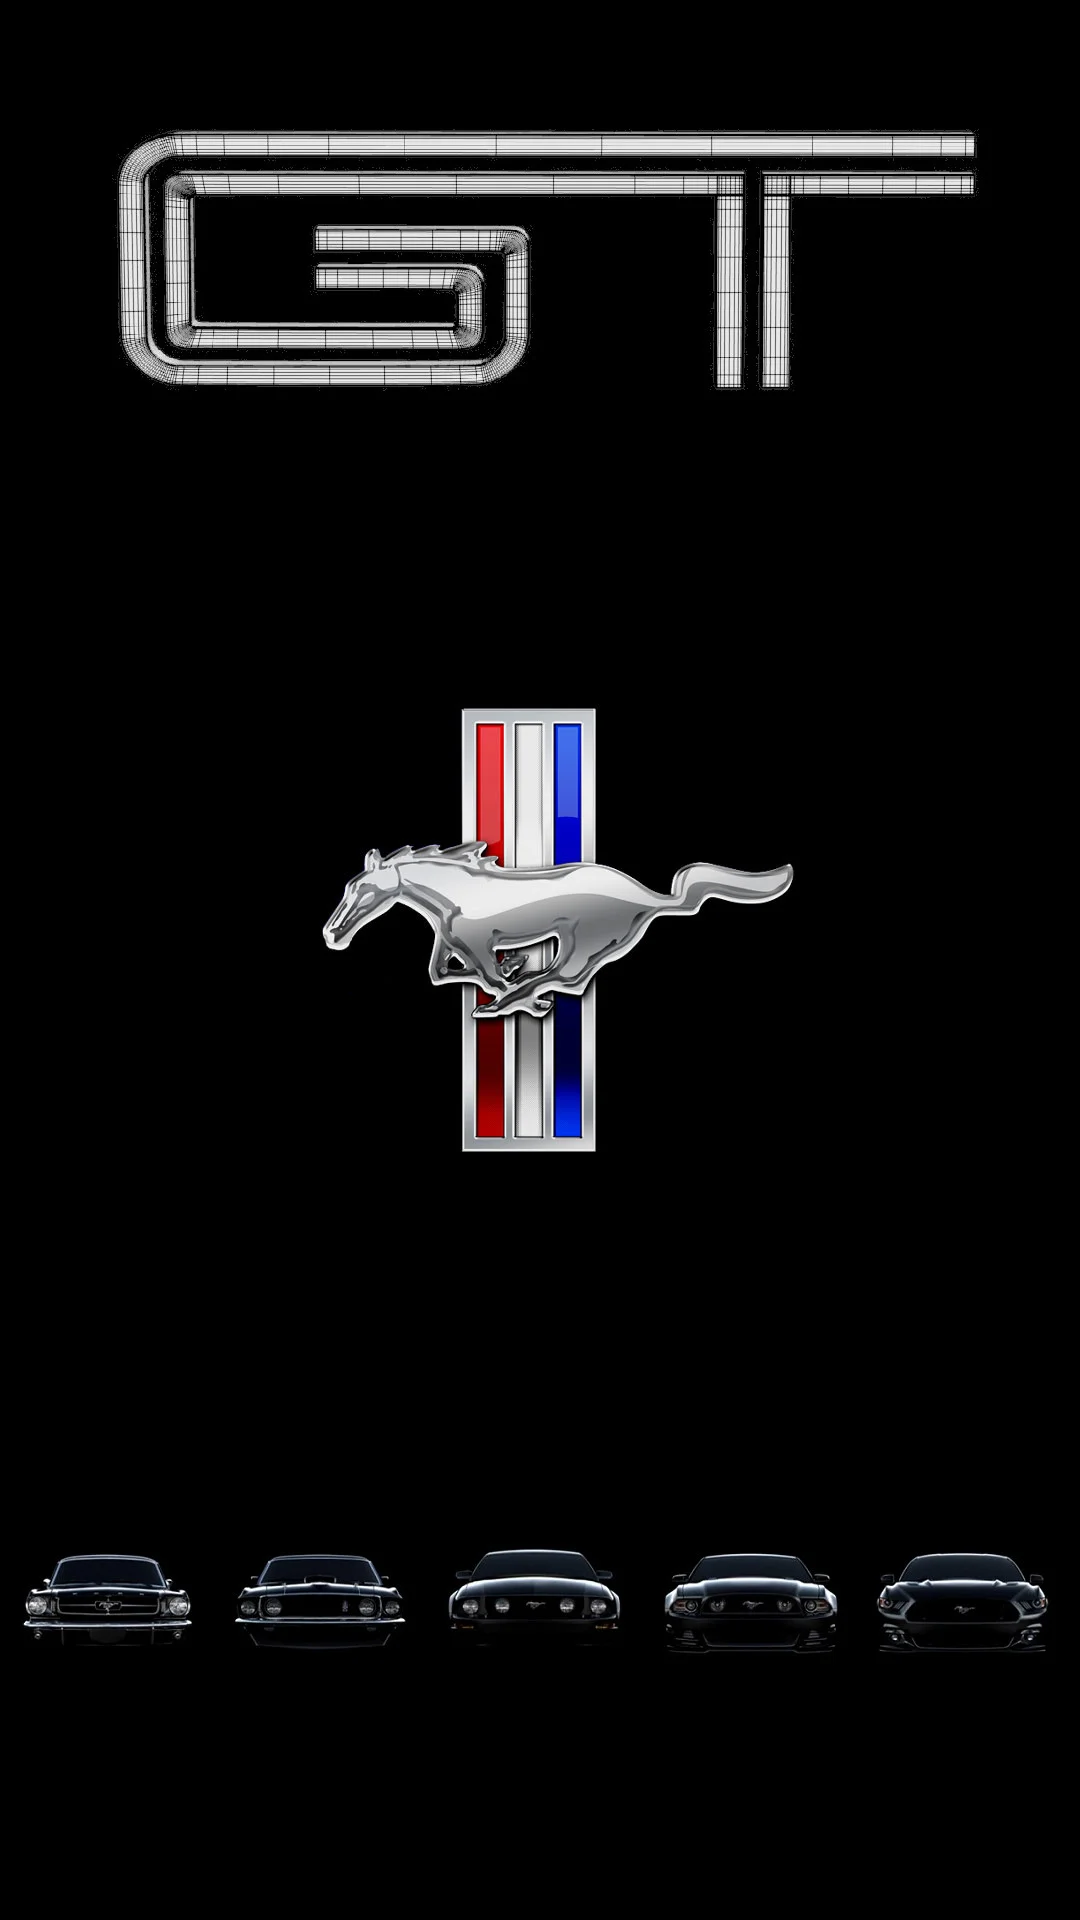 You know what here you go-the same but with a centered mustang logo :) (I  put it down so it didn't hit my lock screen clock)